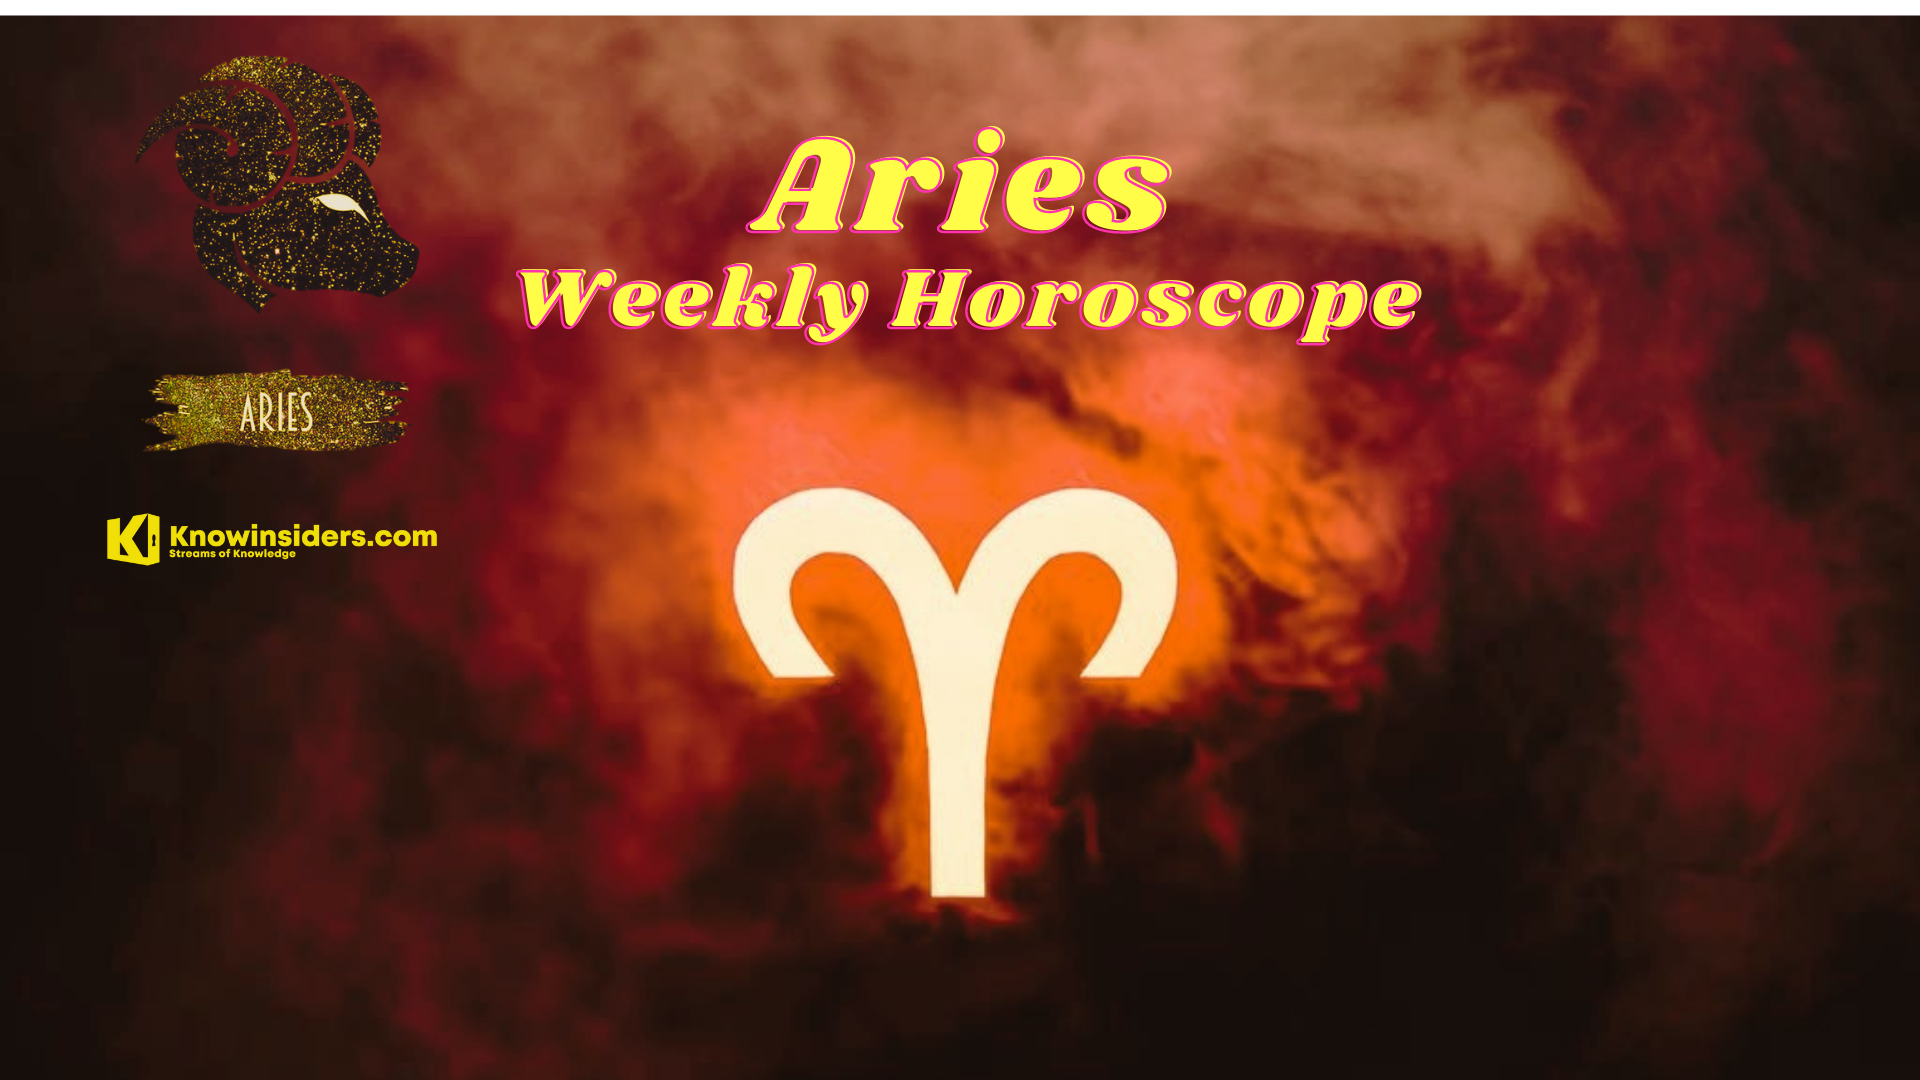 ARIES Weekly Horoscope 26 July - 1 August: Predictions for Health, Love, Financial and Career